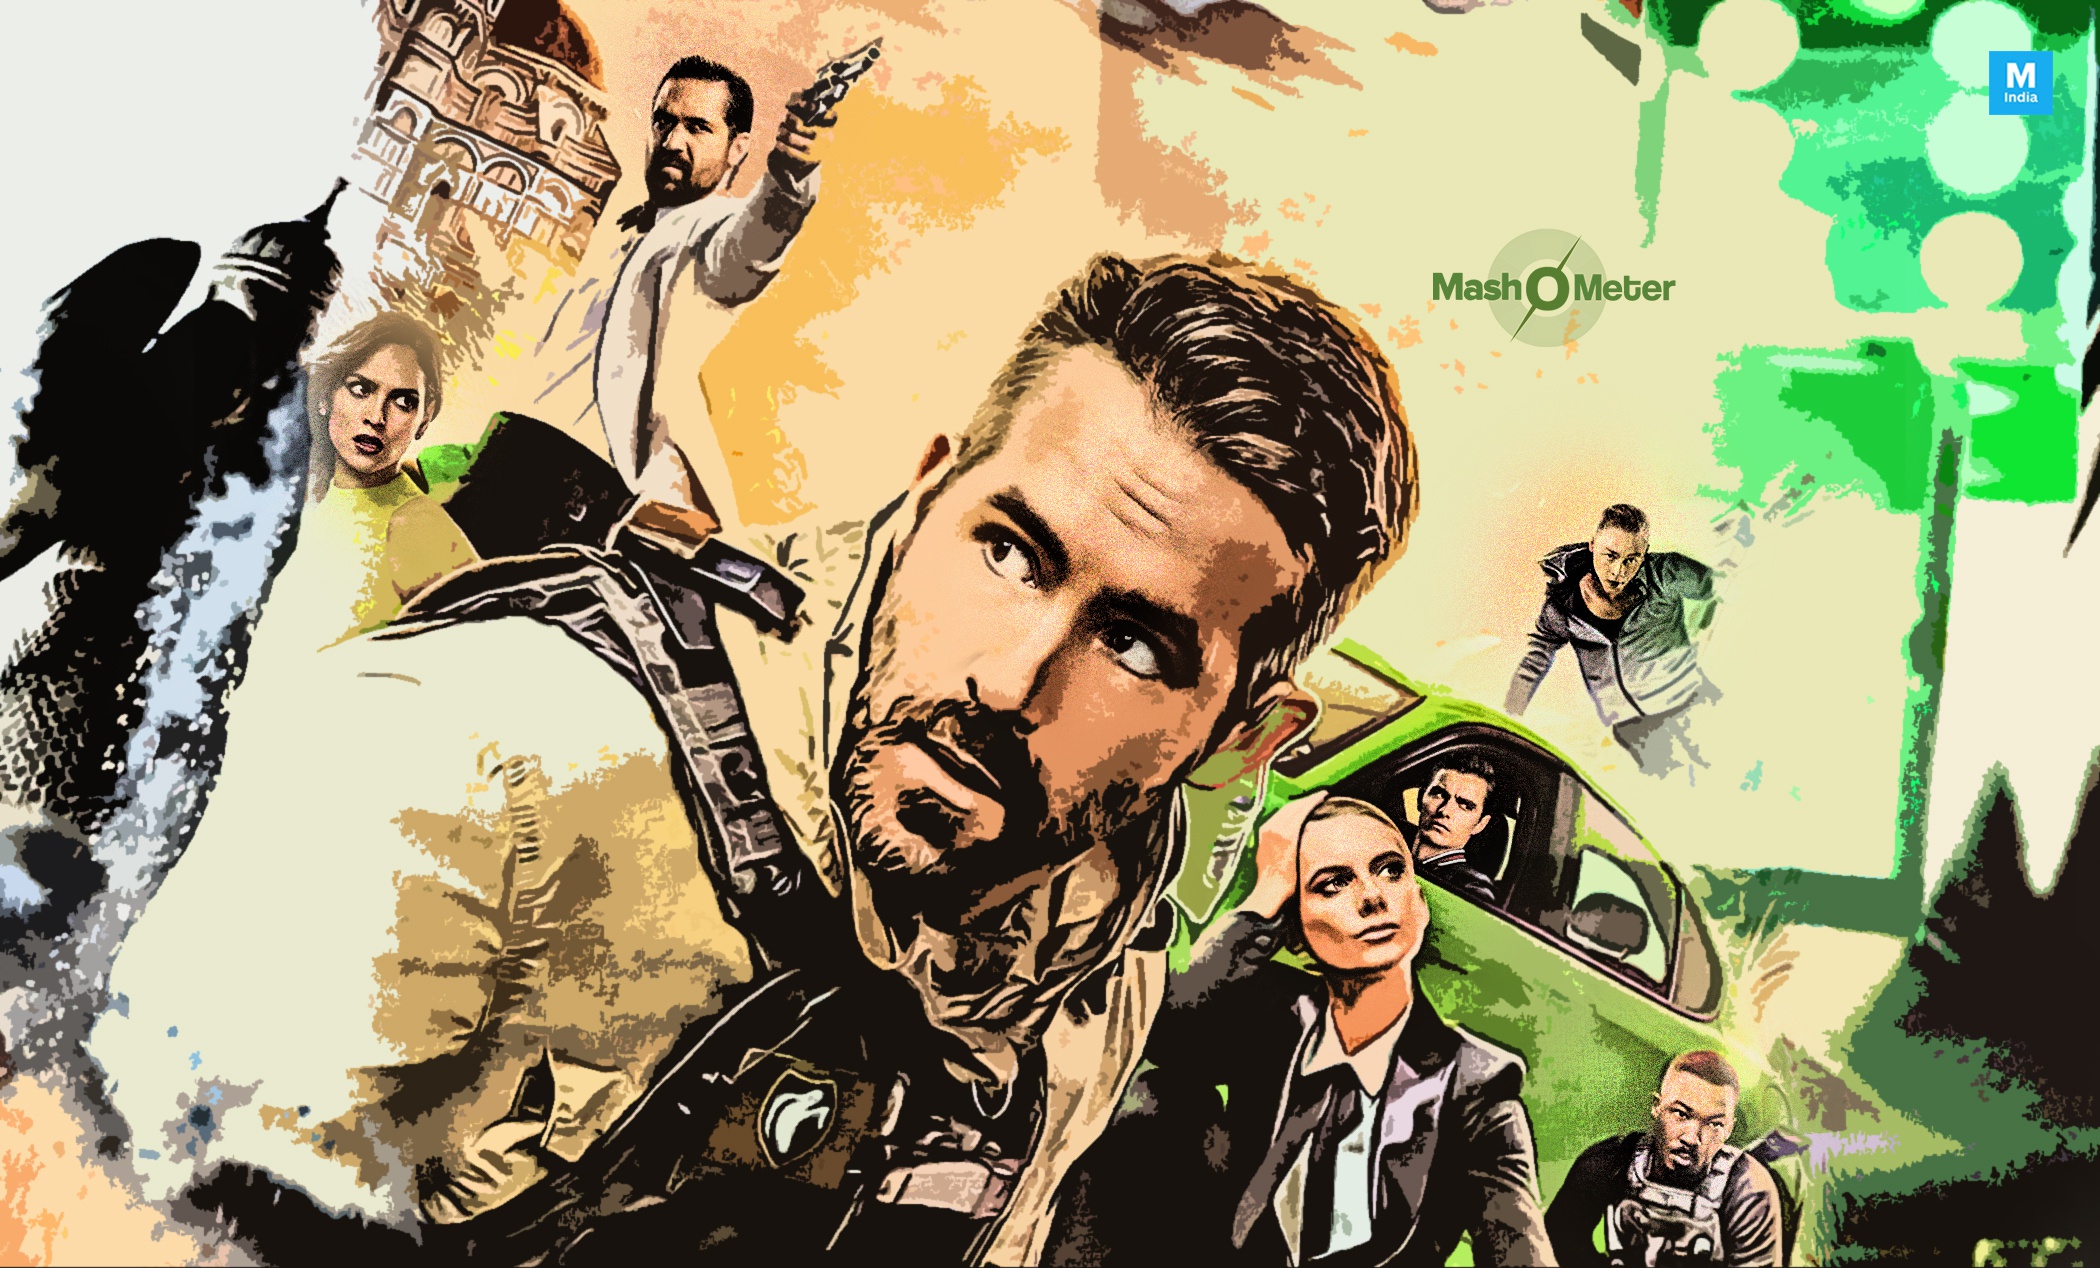 2022/09/6-underground-review-ryan-reynolds-absurd-action-film-is-pea-783s